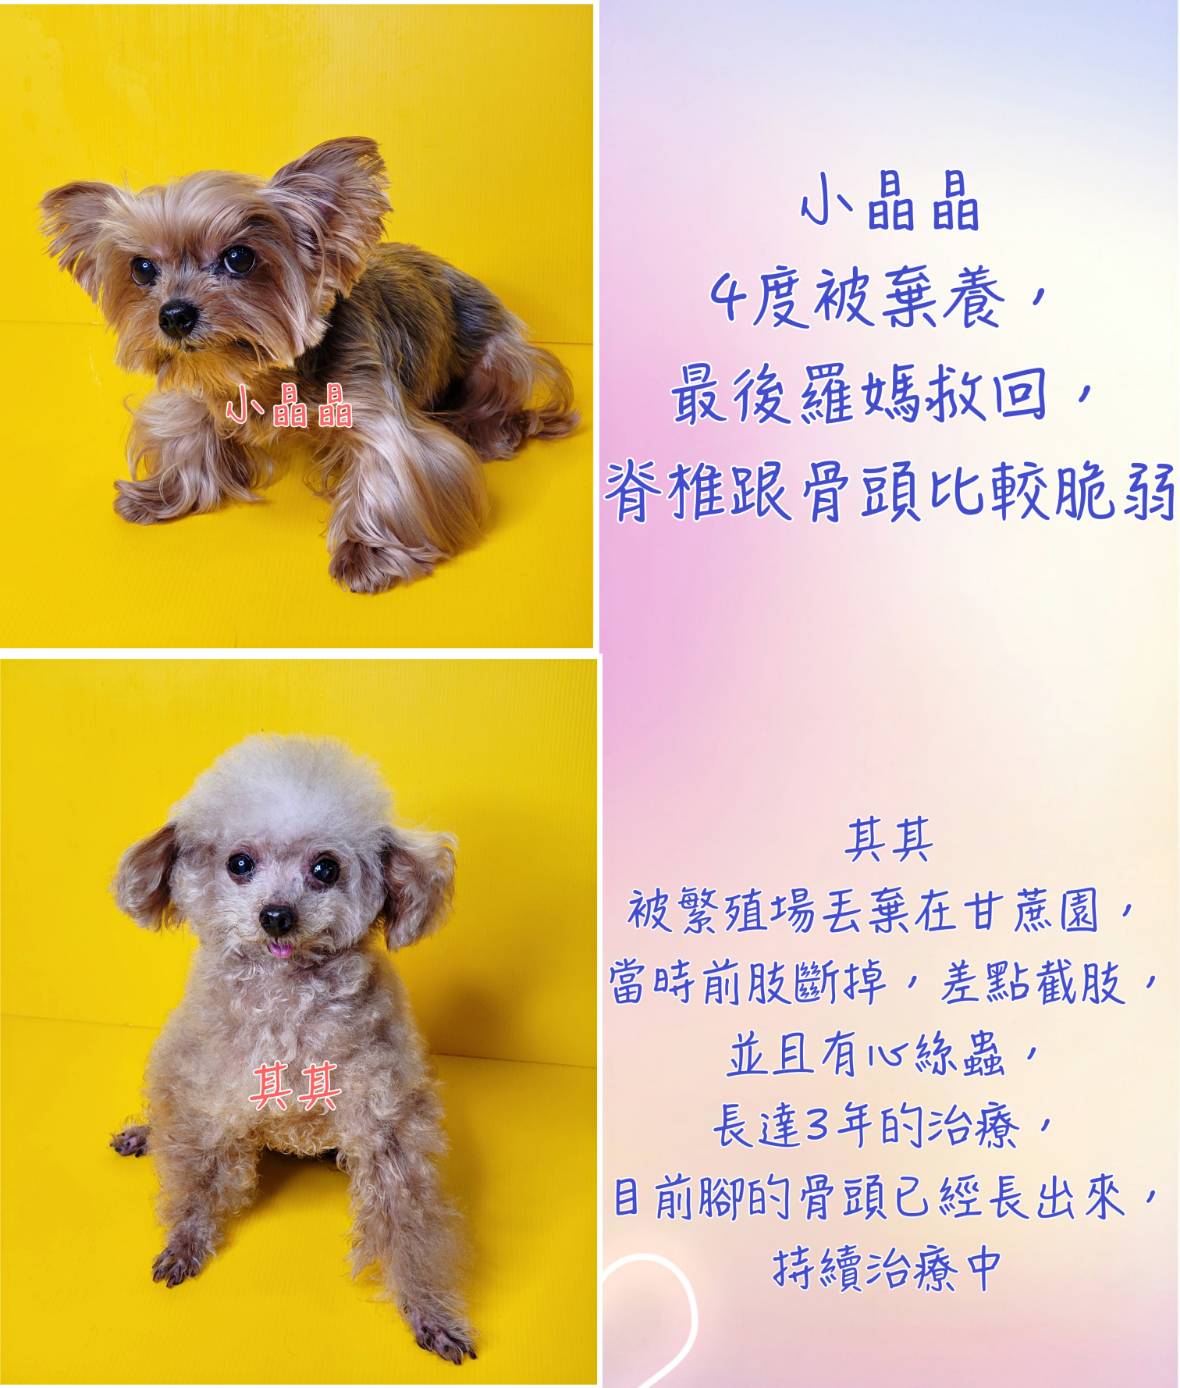 The cute dogs at the party have had a miserable past. (Photo / Provided by Show Lo)